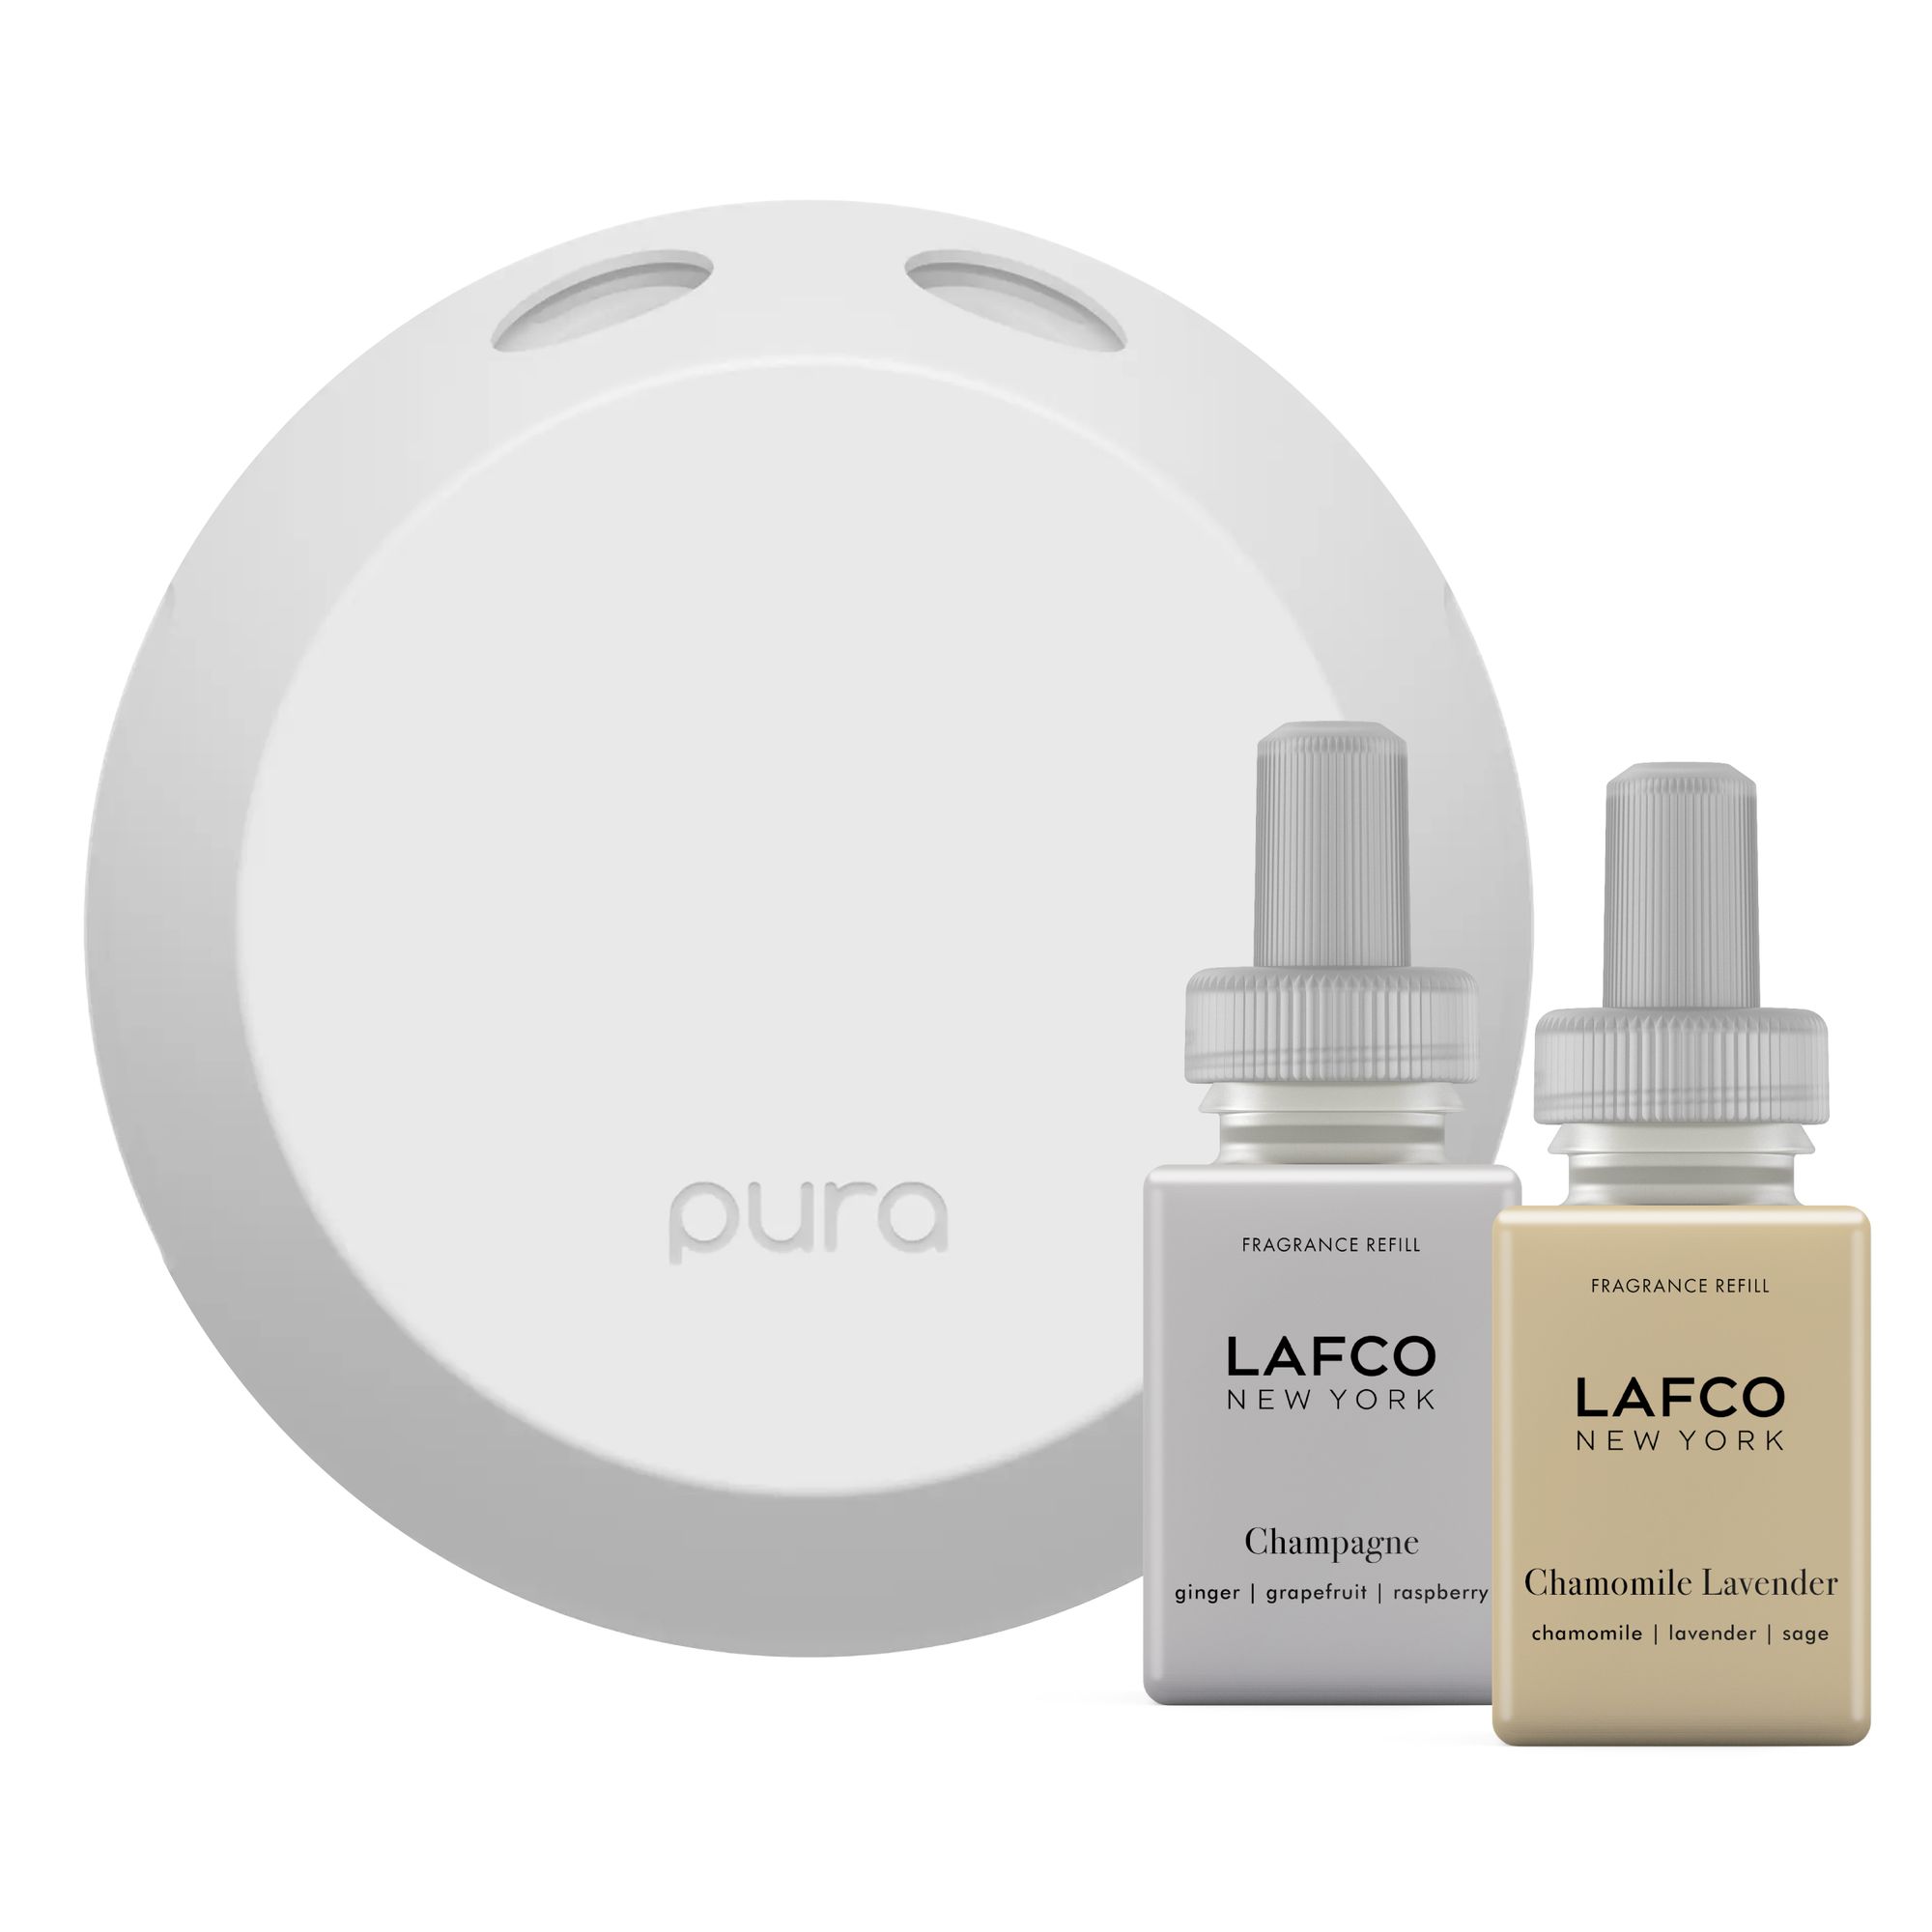 Pura Discount Code 2023: How to Save on Pura Smart Diffuser +